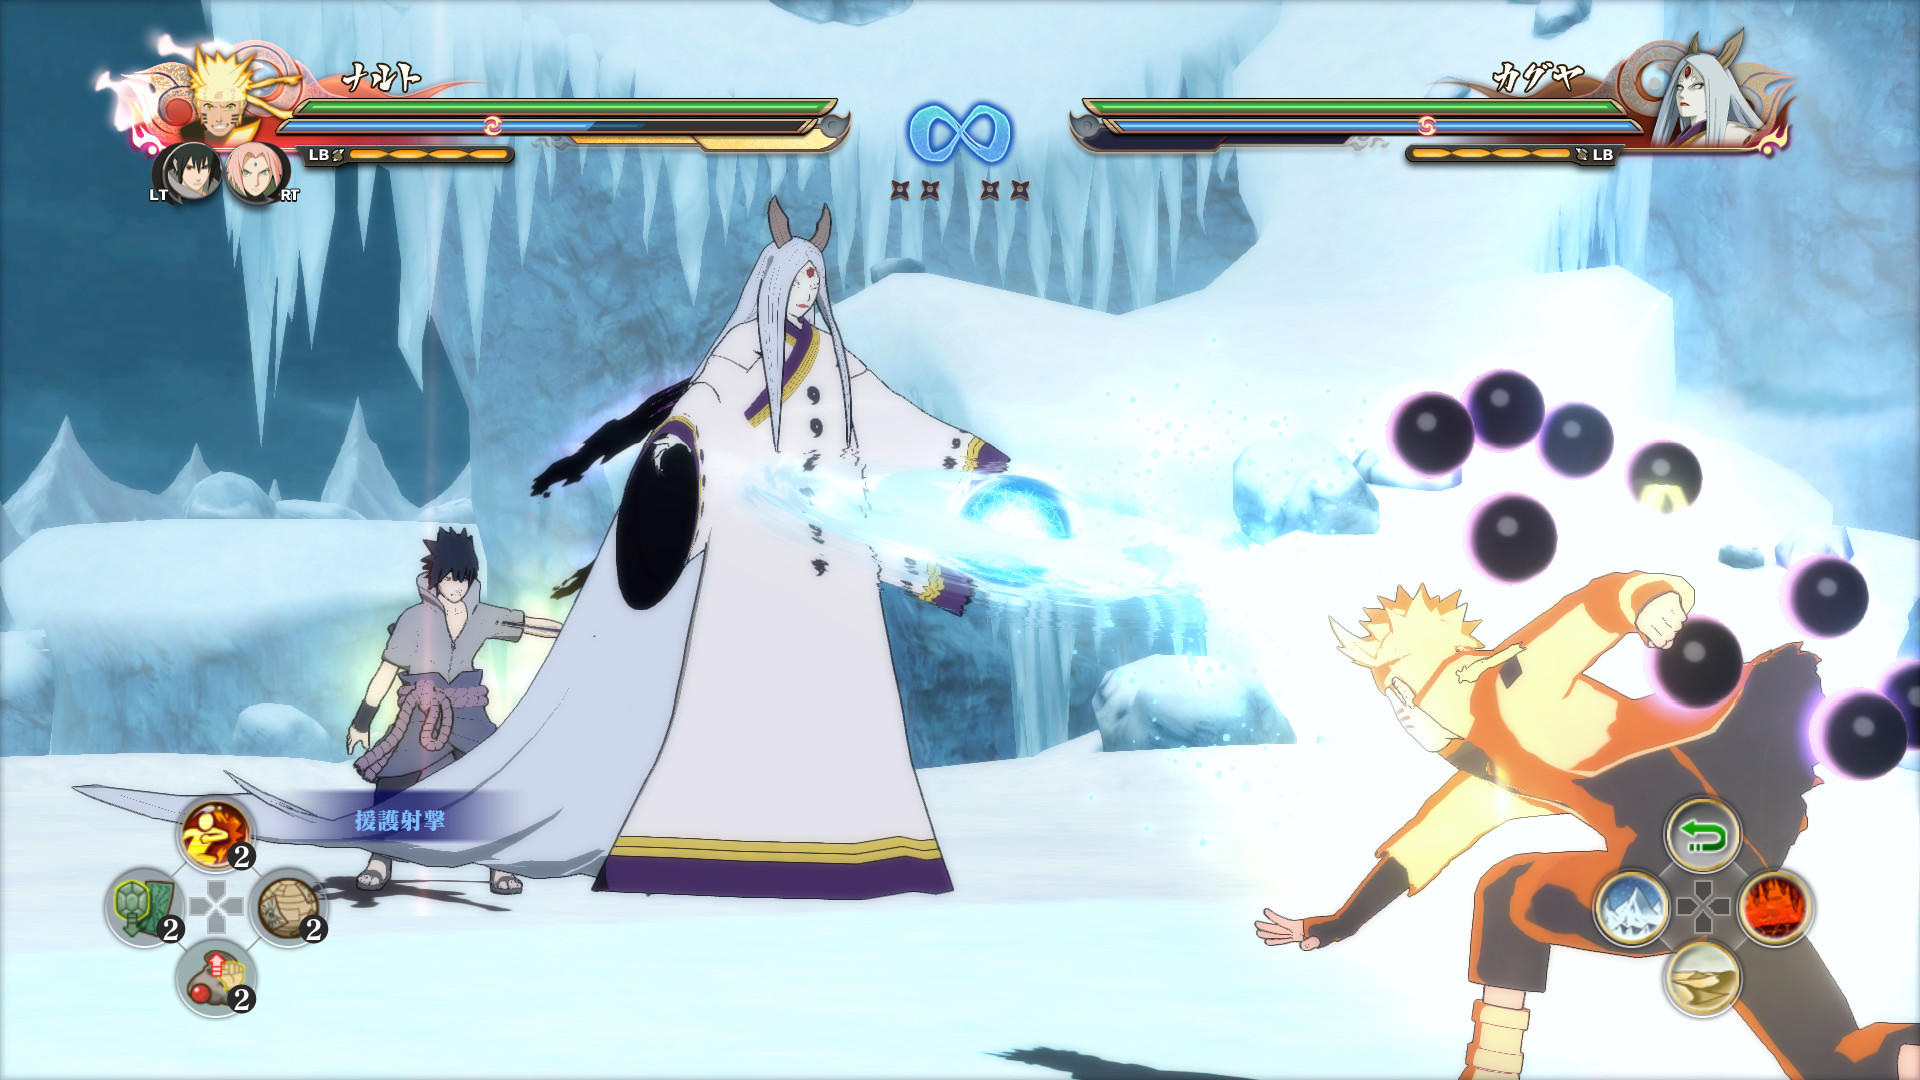 Boruto Naruto Next Generations Game Highly Compressed PPSSPP Download